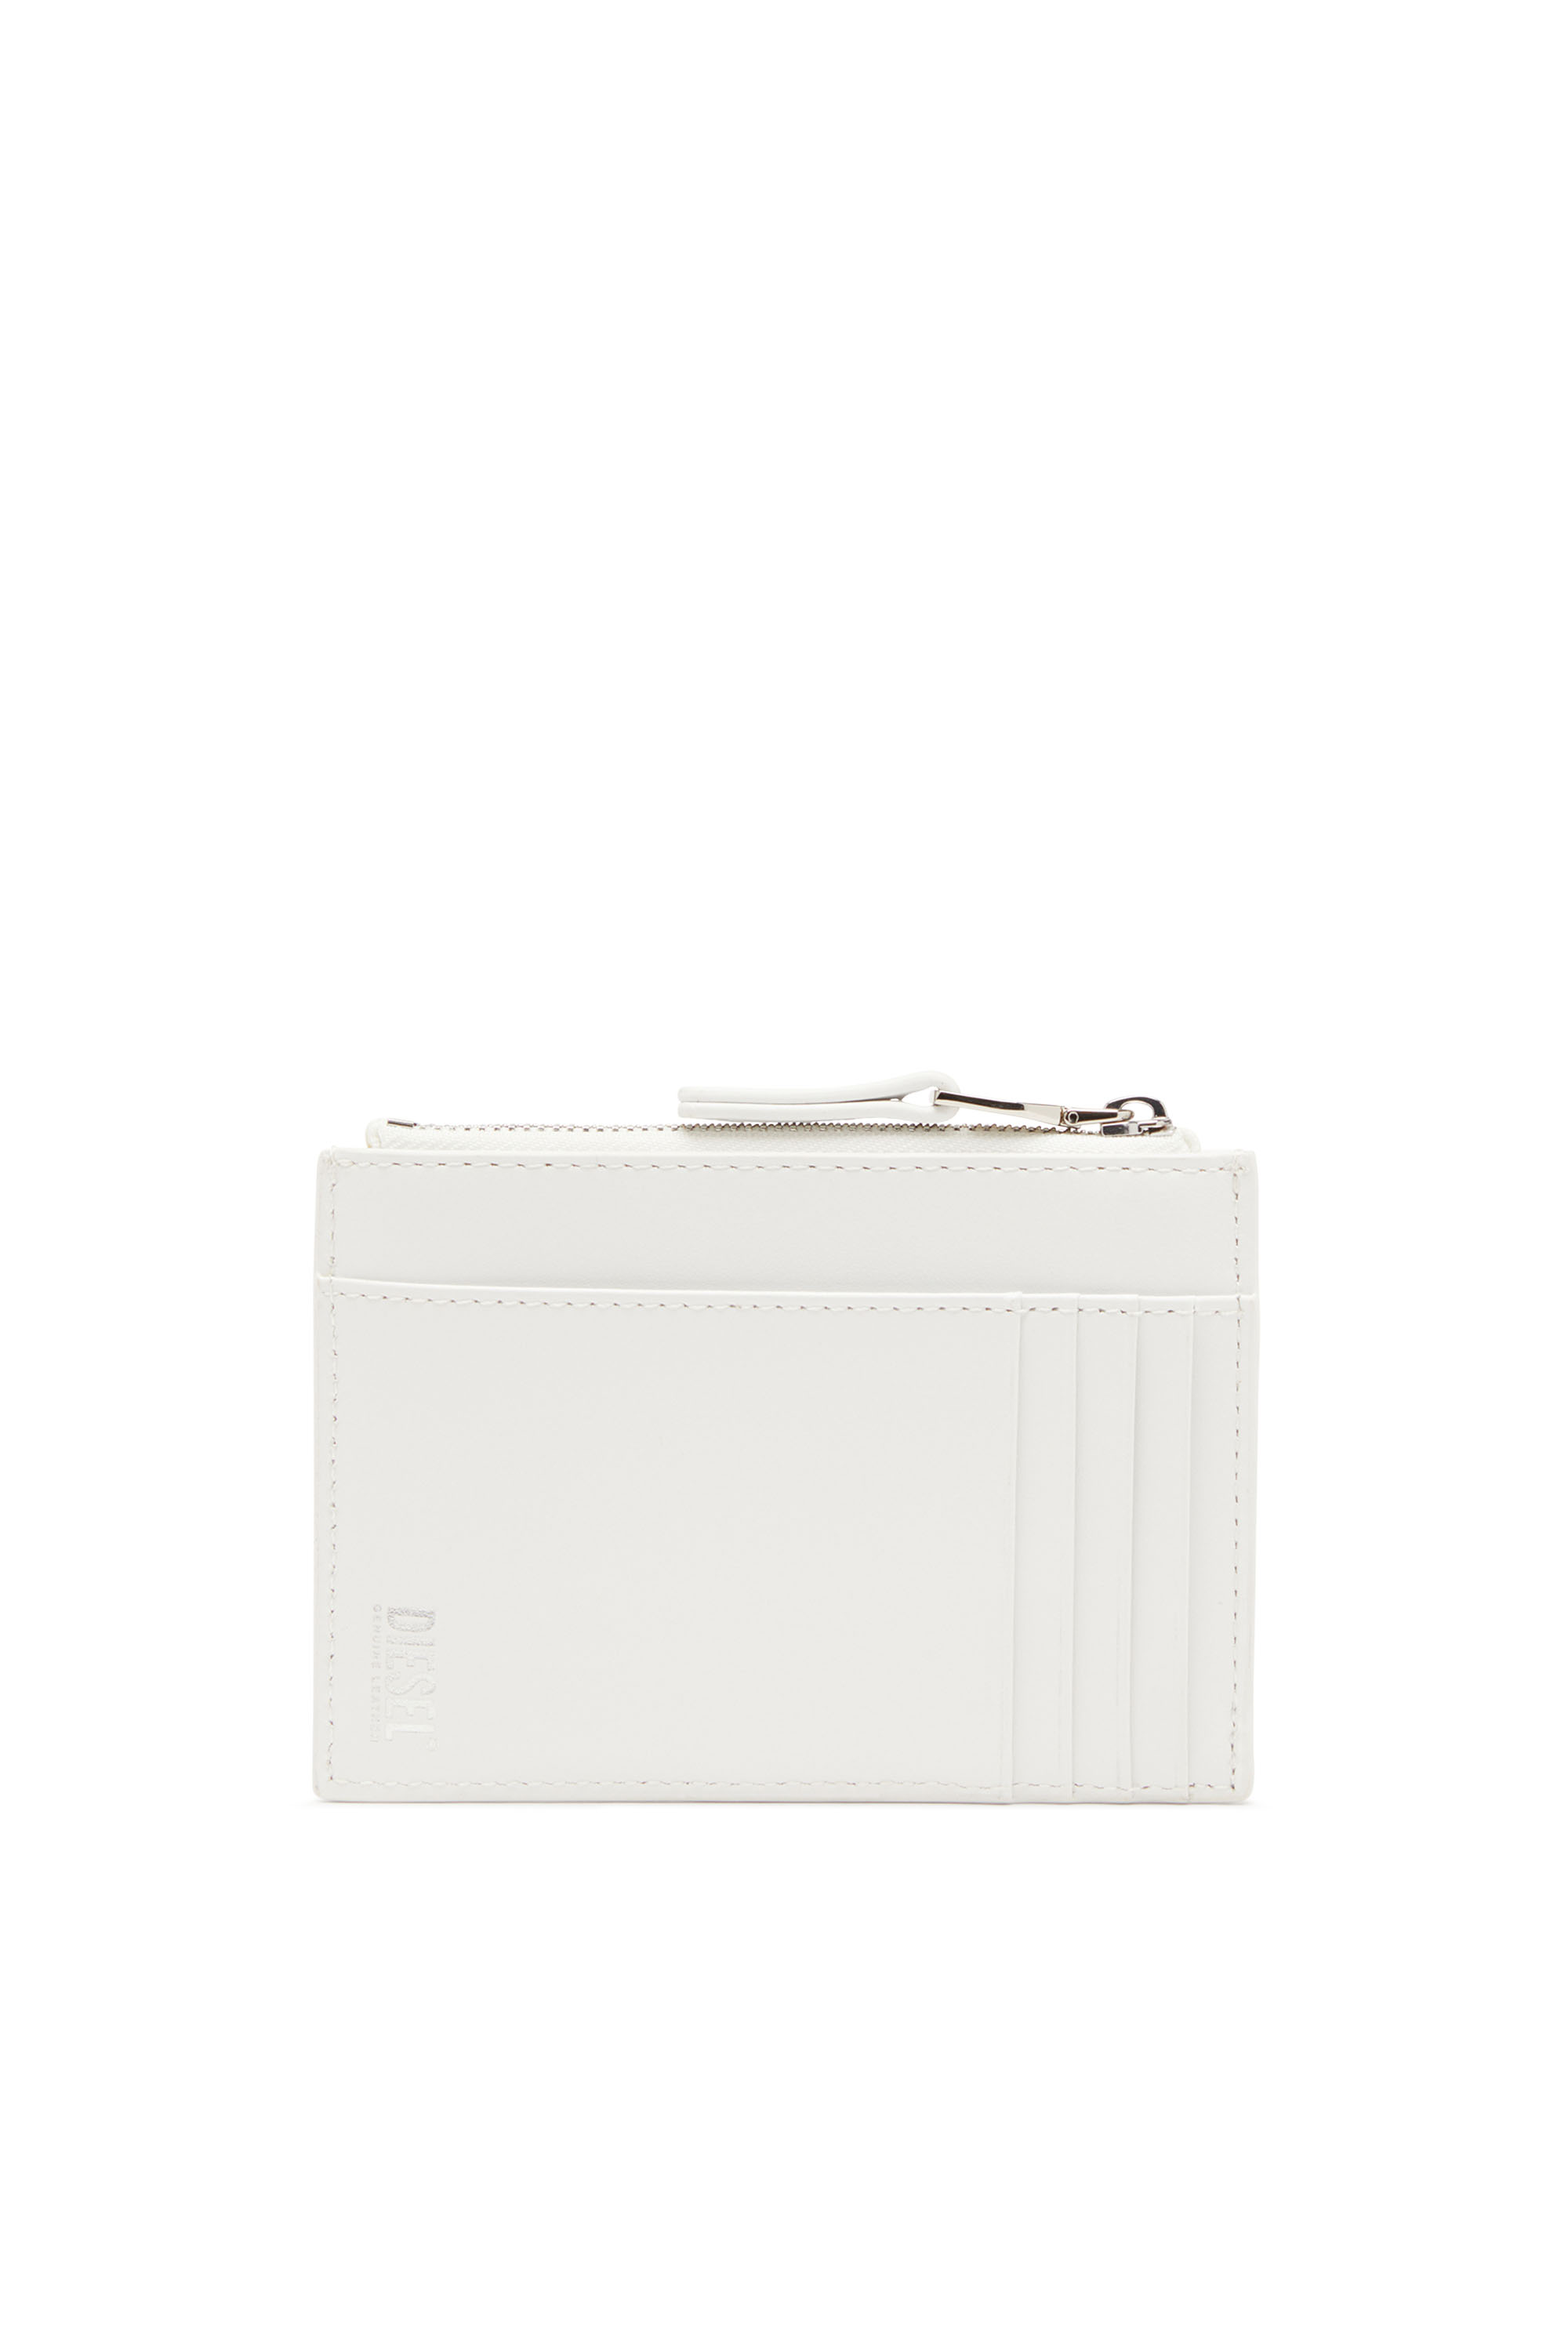 Diesel - 1DR CARD HOLDER I, Woman Card holder in leather in White - Image 2